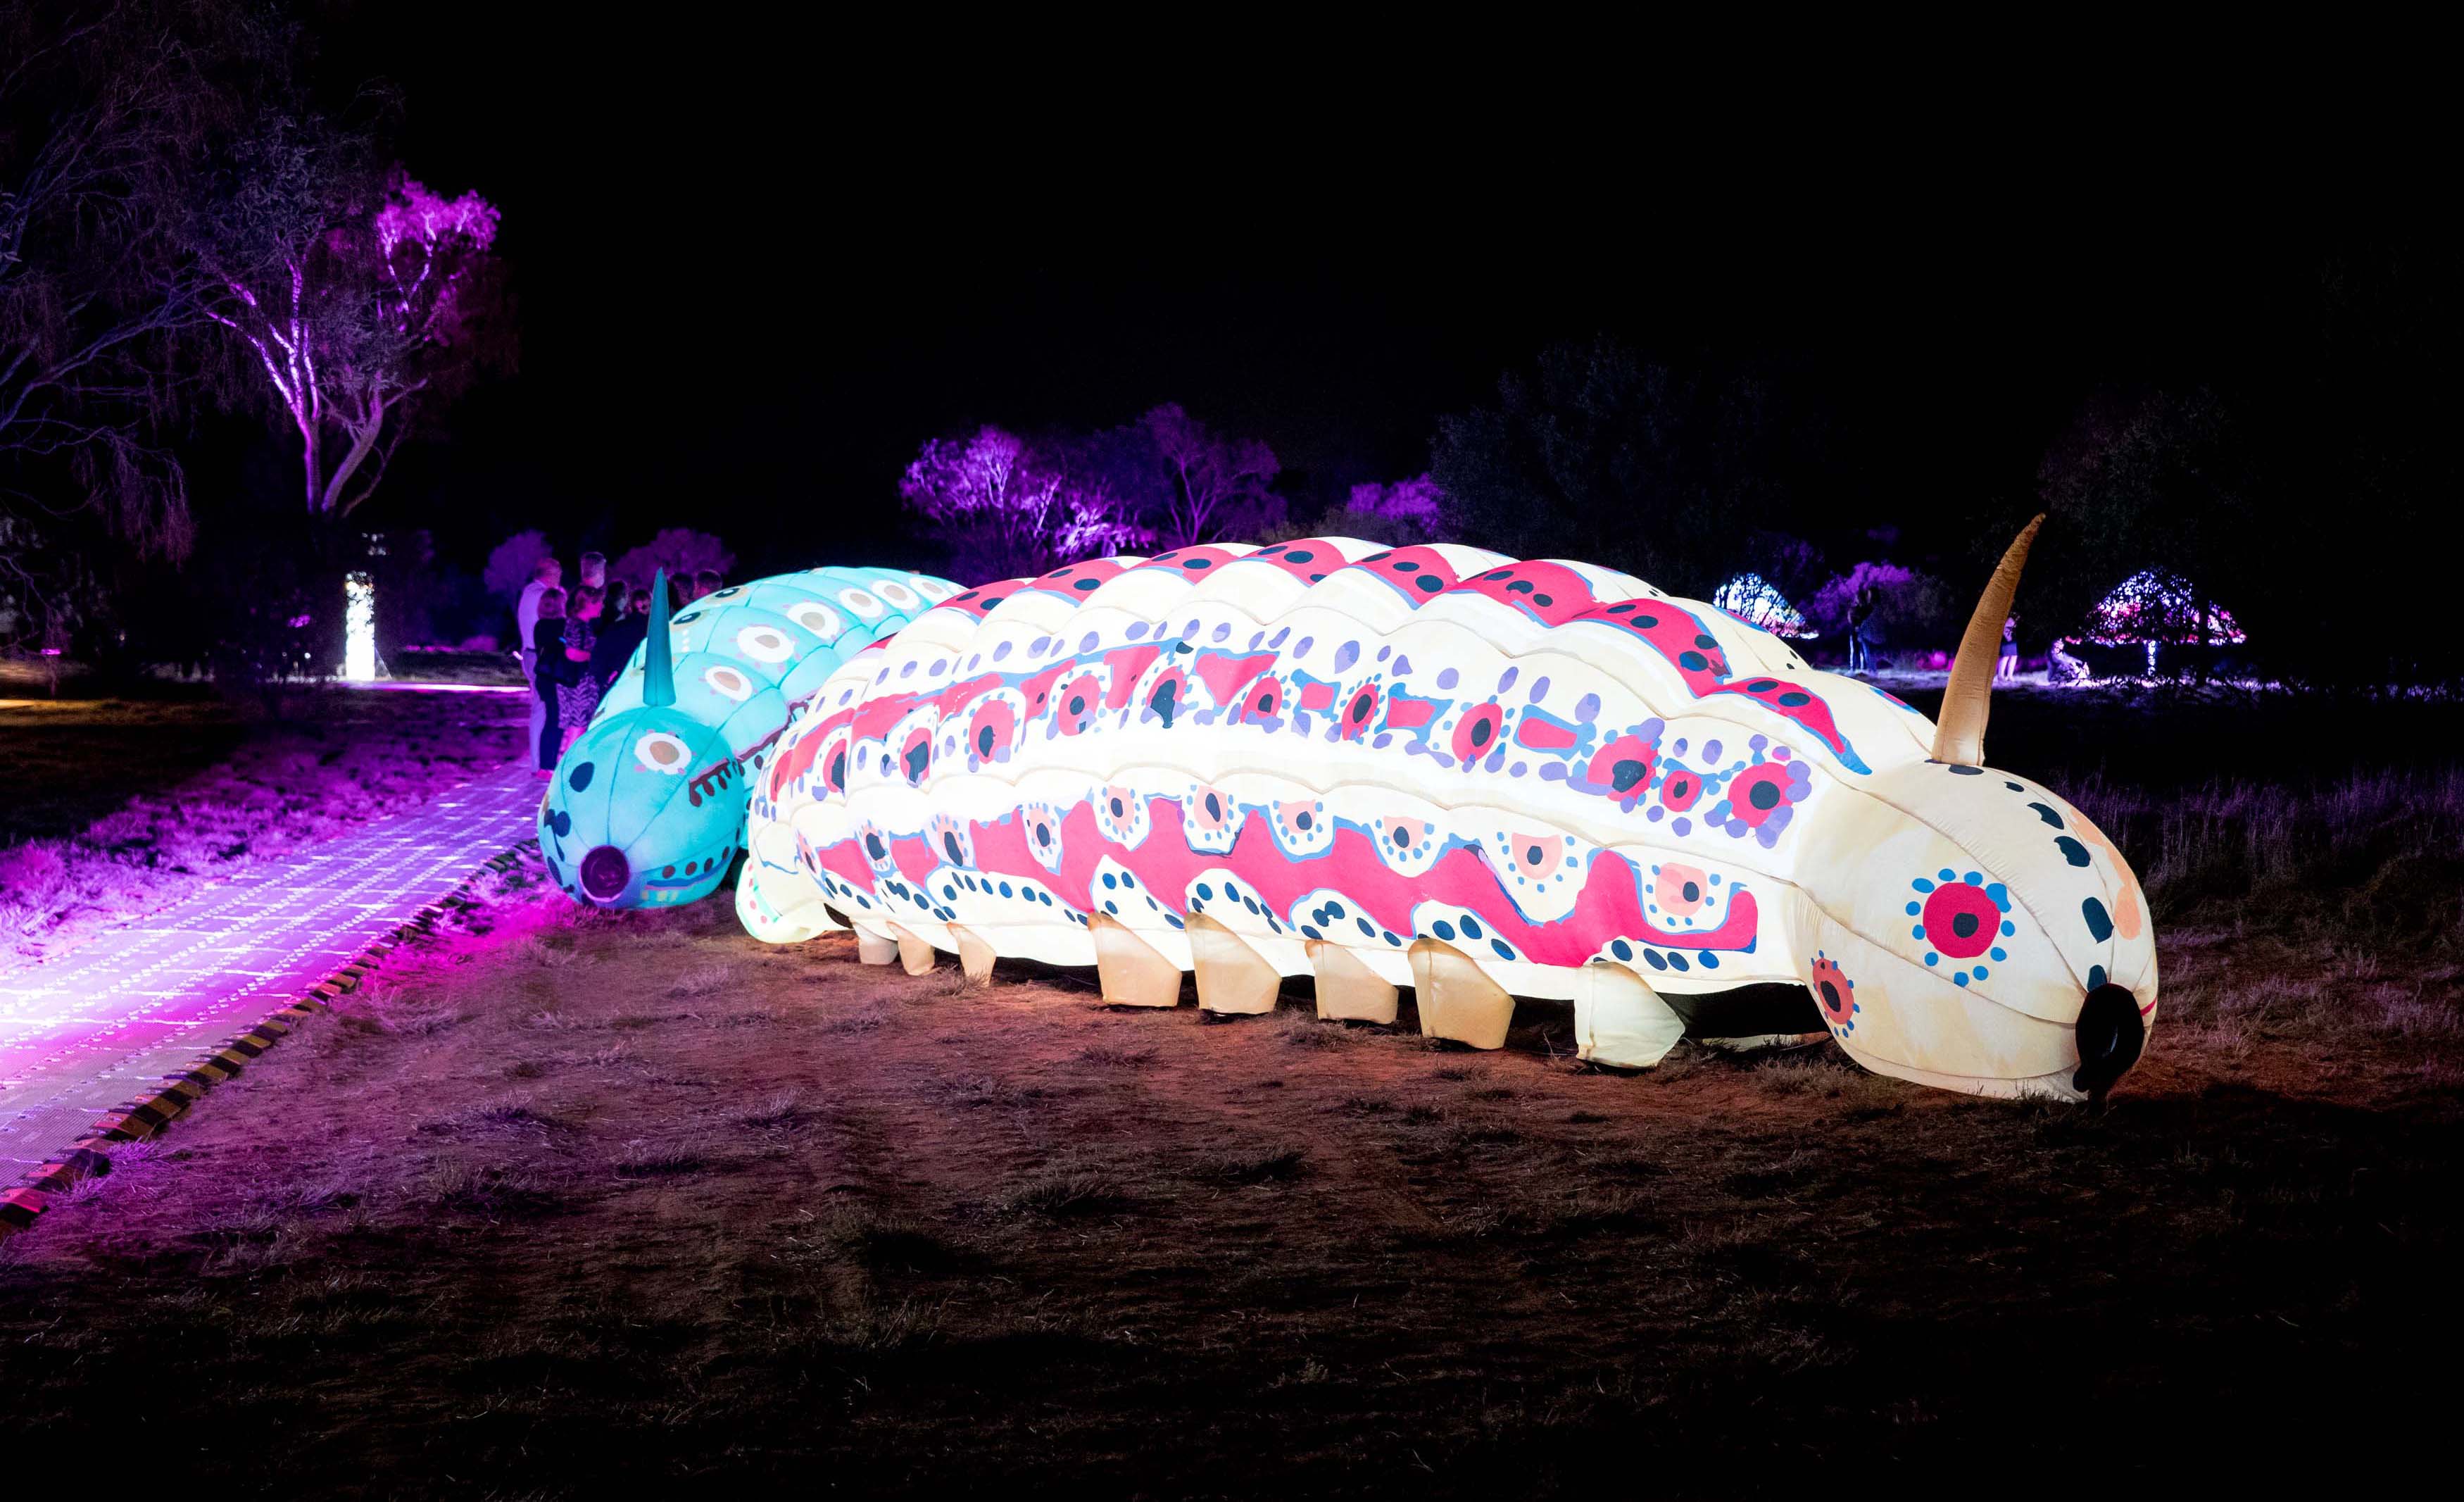 Australia's Biggest Light Installation Has Been Unveiled in Alice Springs